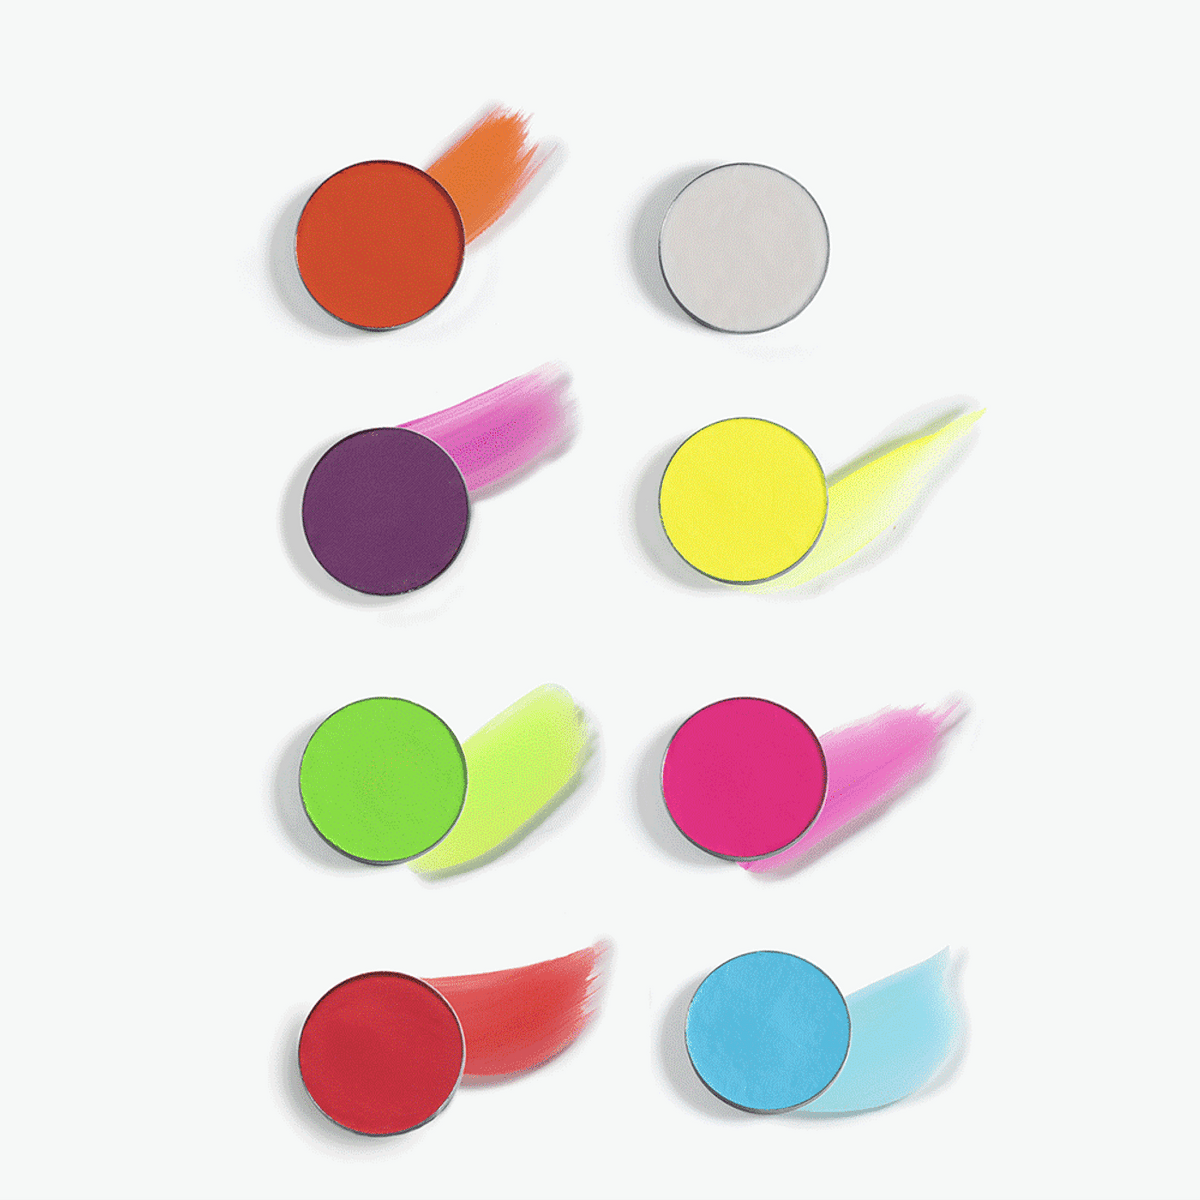 Neon UV Glow Paradise Makeup AQ | FACE PAINT PALETTE - Beserk - all, body, clickfrenzy15-2023, cosmetics, cosplay, costume, cpgstinc, cruelty free, cruetly free, dec22, discountapp, face paint, fp, googleshopping, halloween cosmetics, halloween makeup, labeluvreactive, labelvegan, make up, makeup, mehron makeup, multicolour, palette, R291222, special effects makeup, special fx makeup, tomfoolery, TOMIN323278, uv, uv reactive, uvreactive, vegan